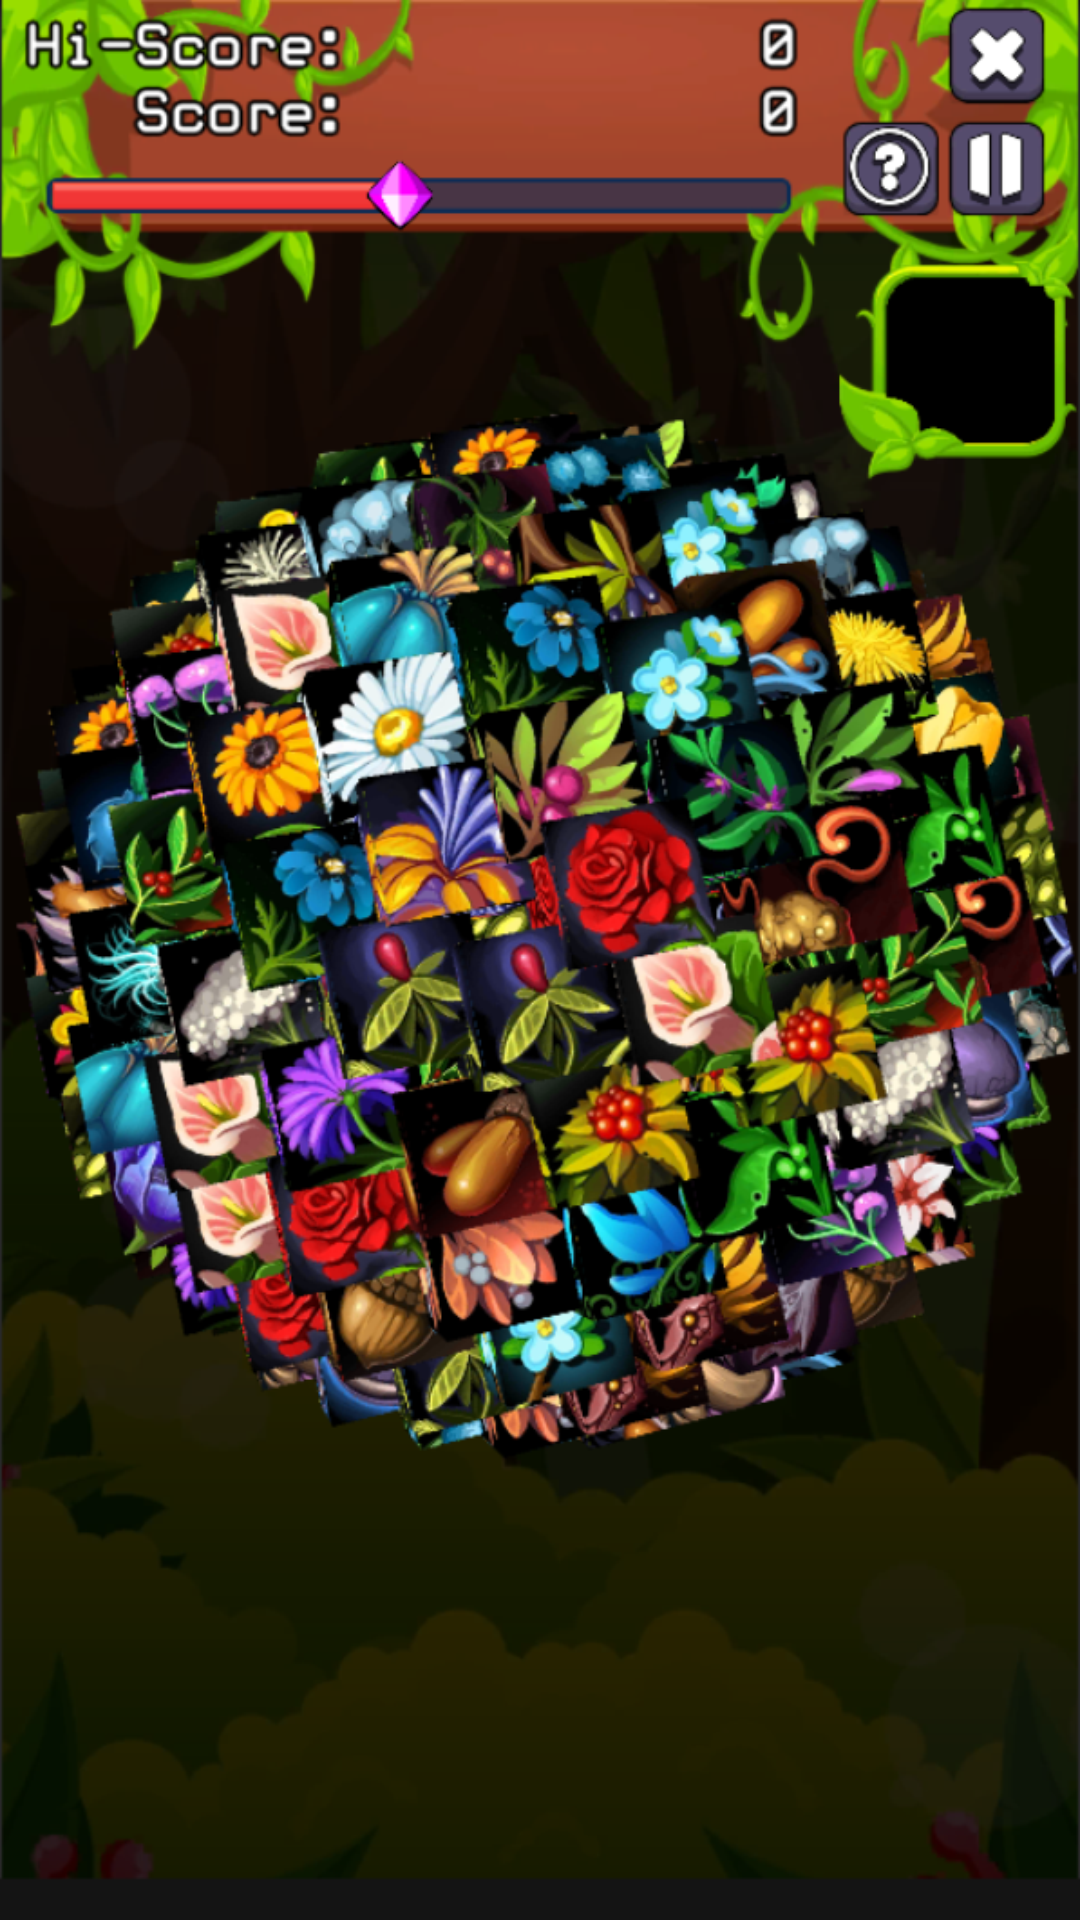 Herbology - Themed 3D cube matching puzzle game